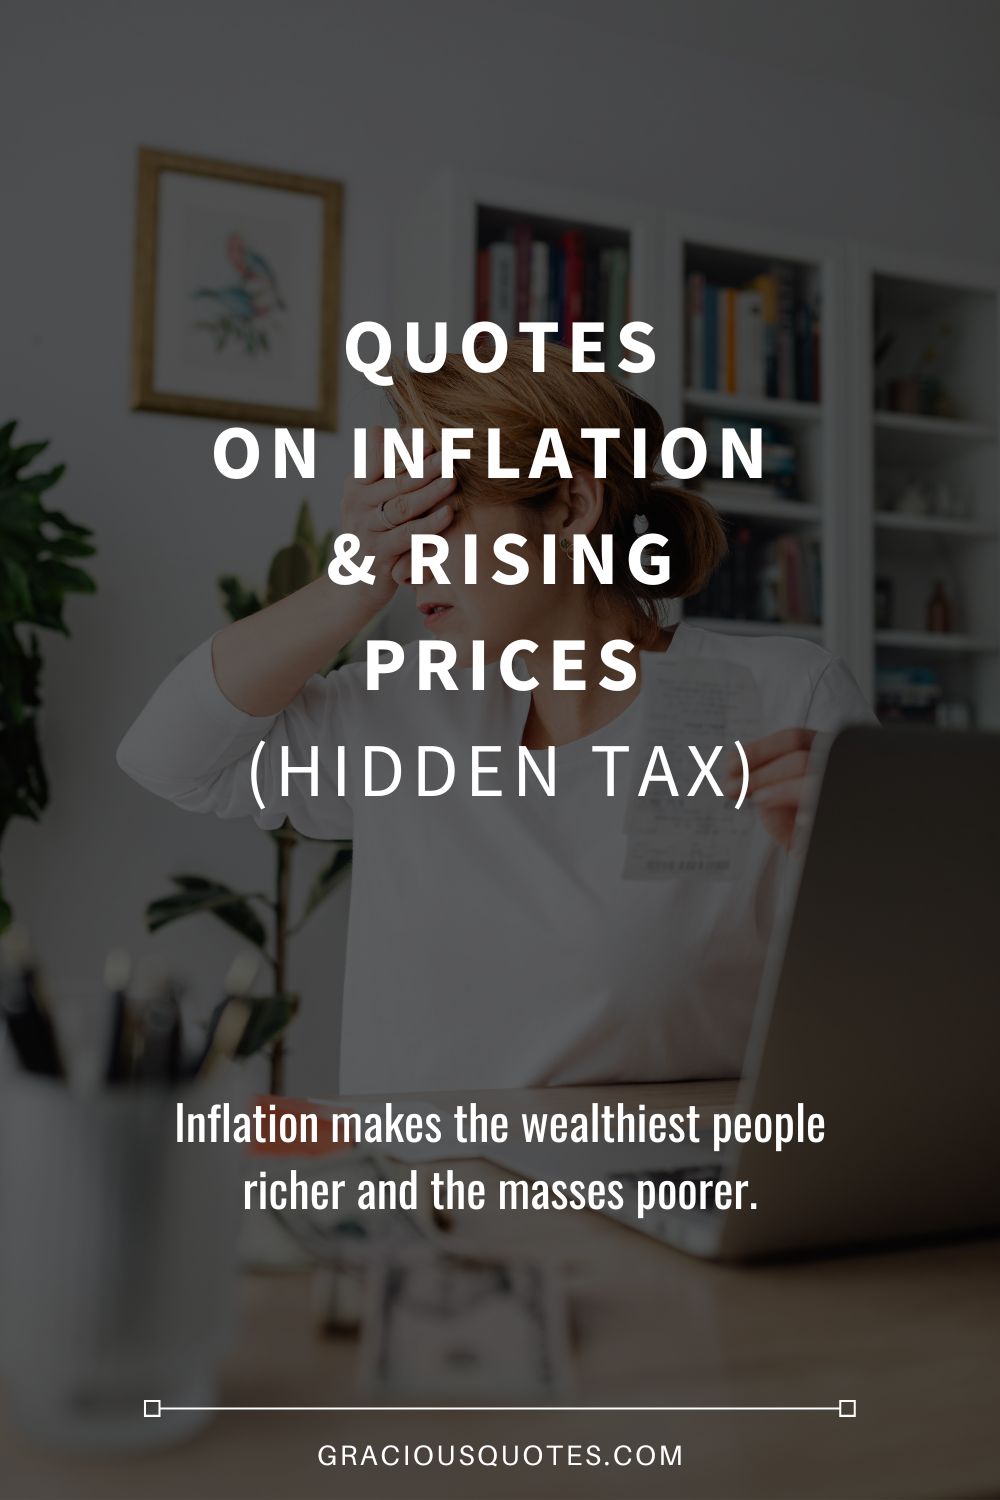 Quotes on Inflation & Rising Prices (HIDDEN TAX) - Gracious Quotes